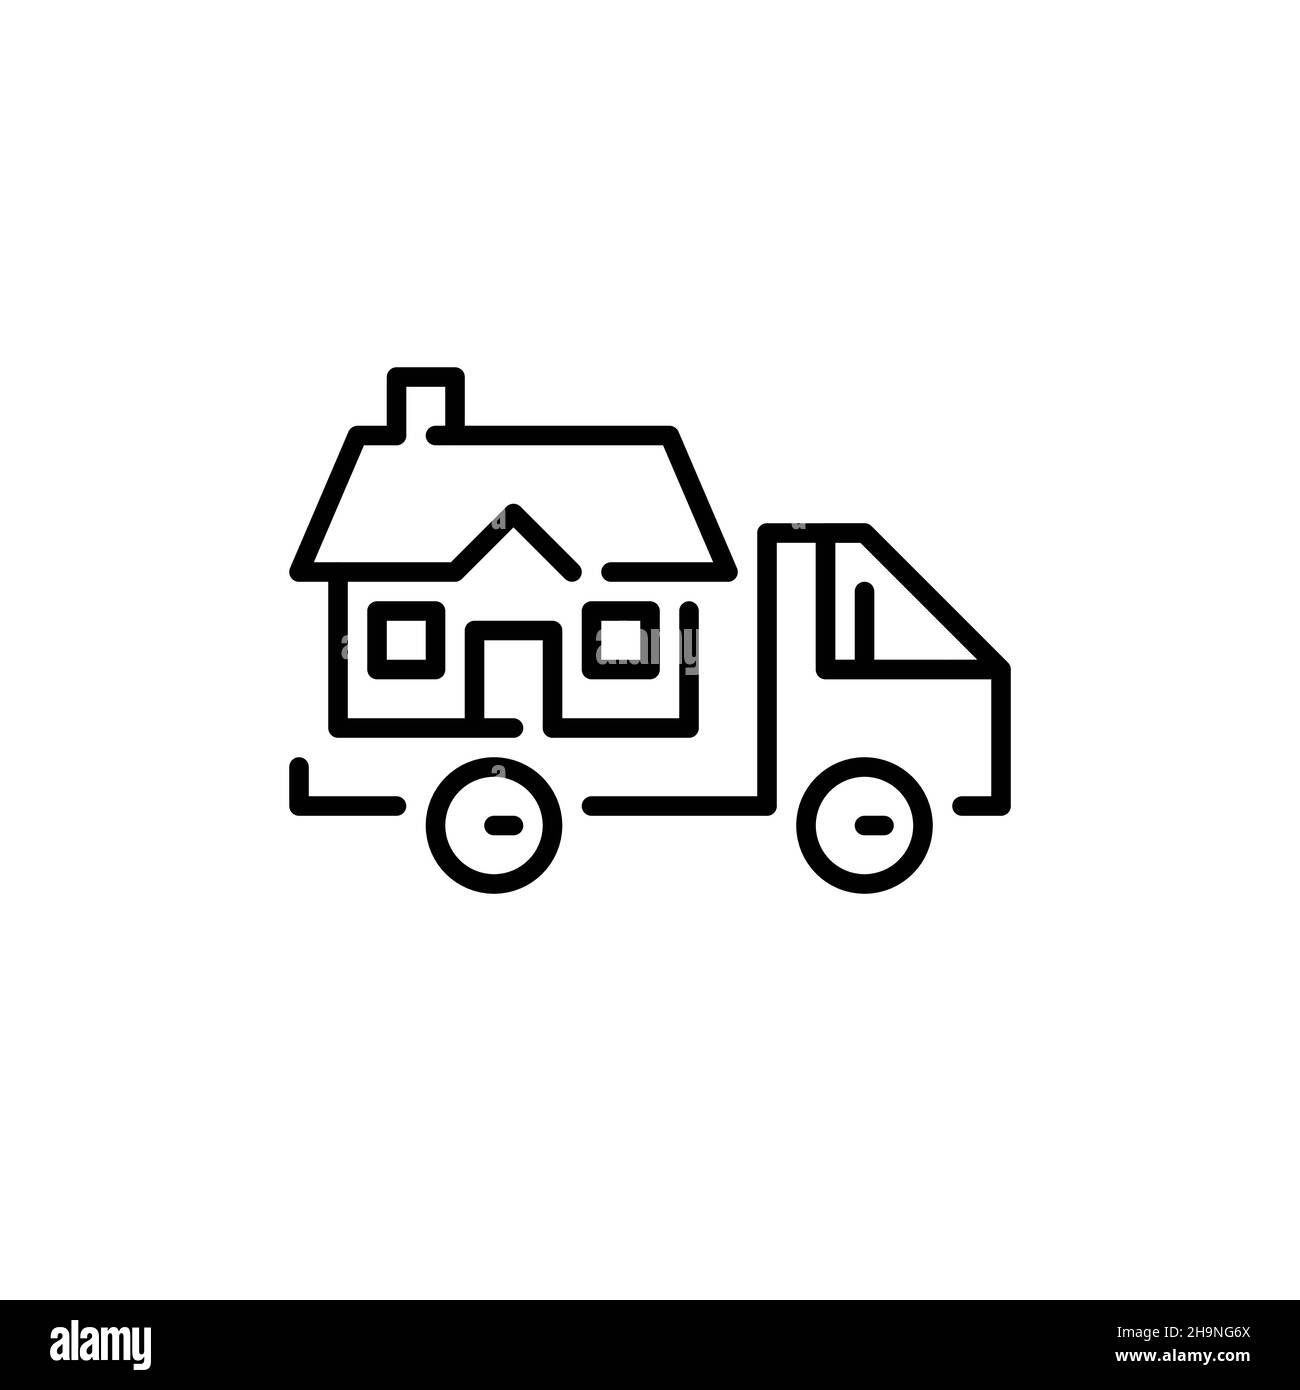 Relocation and moving houses icon. Truck carrying a house. Pixel perfect, editable stroke icon Stock Vector